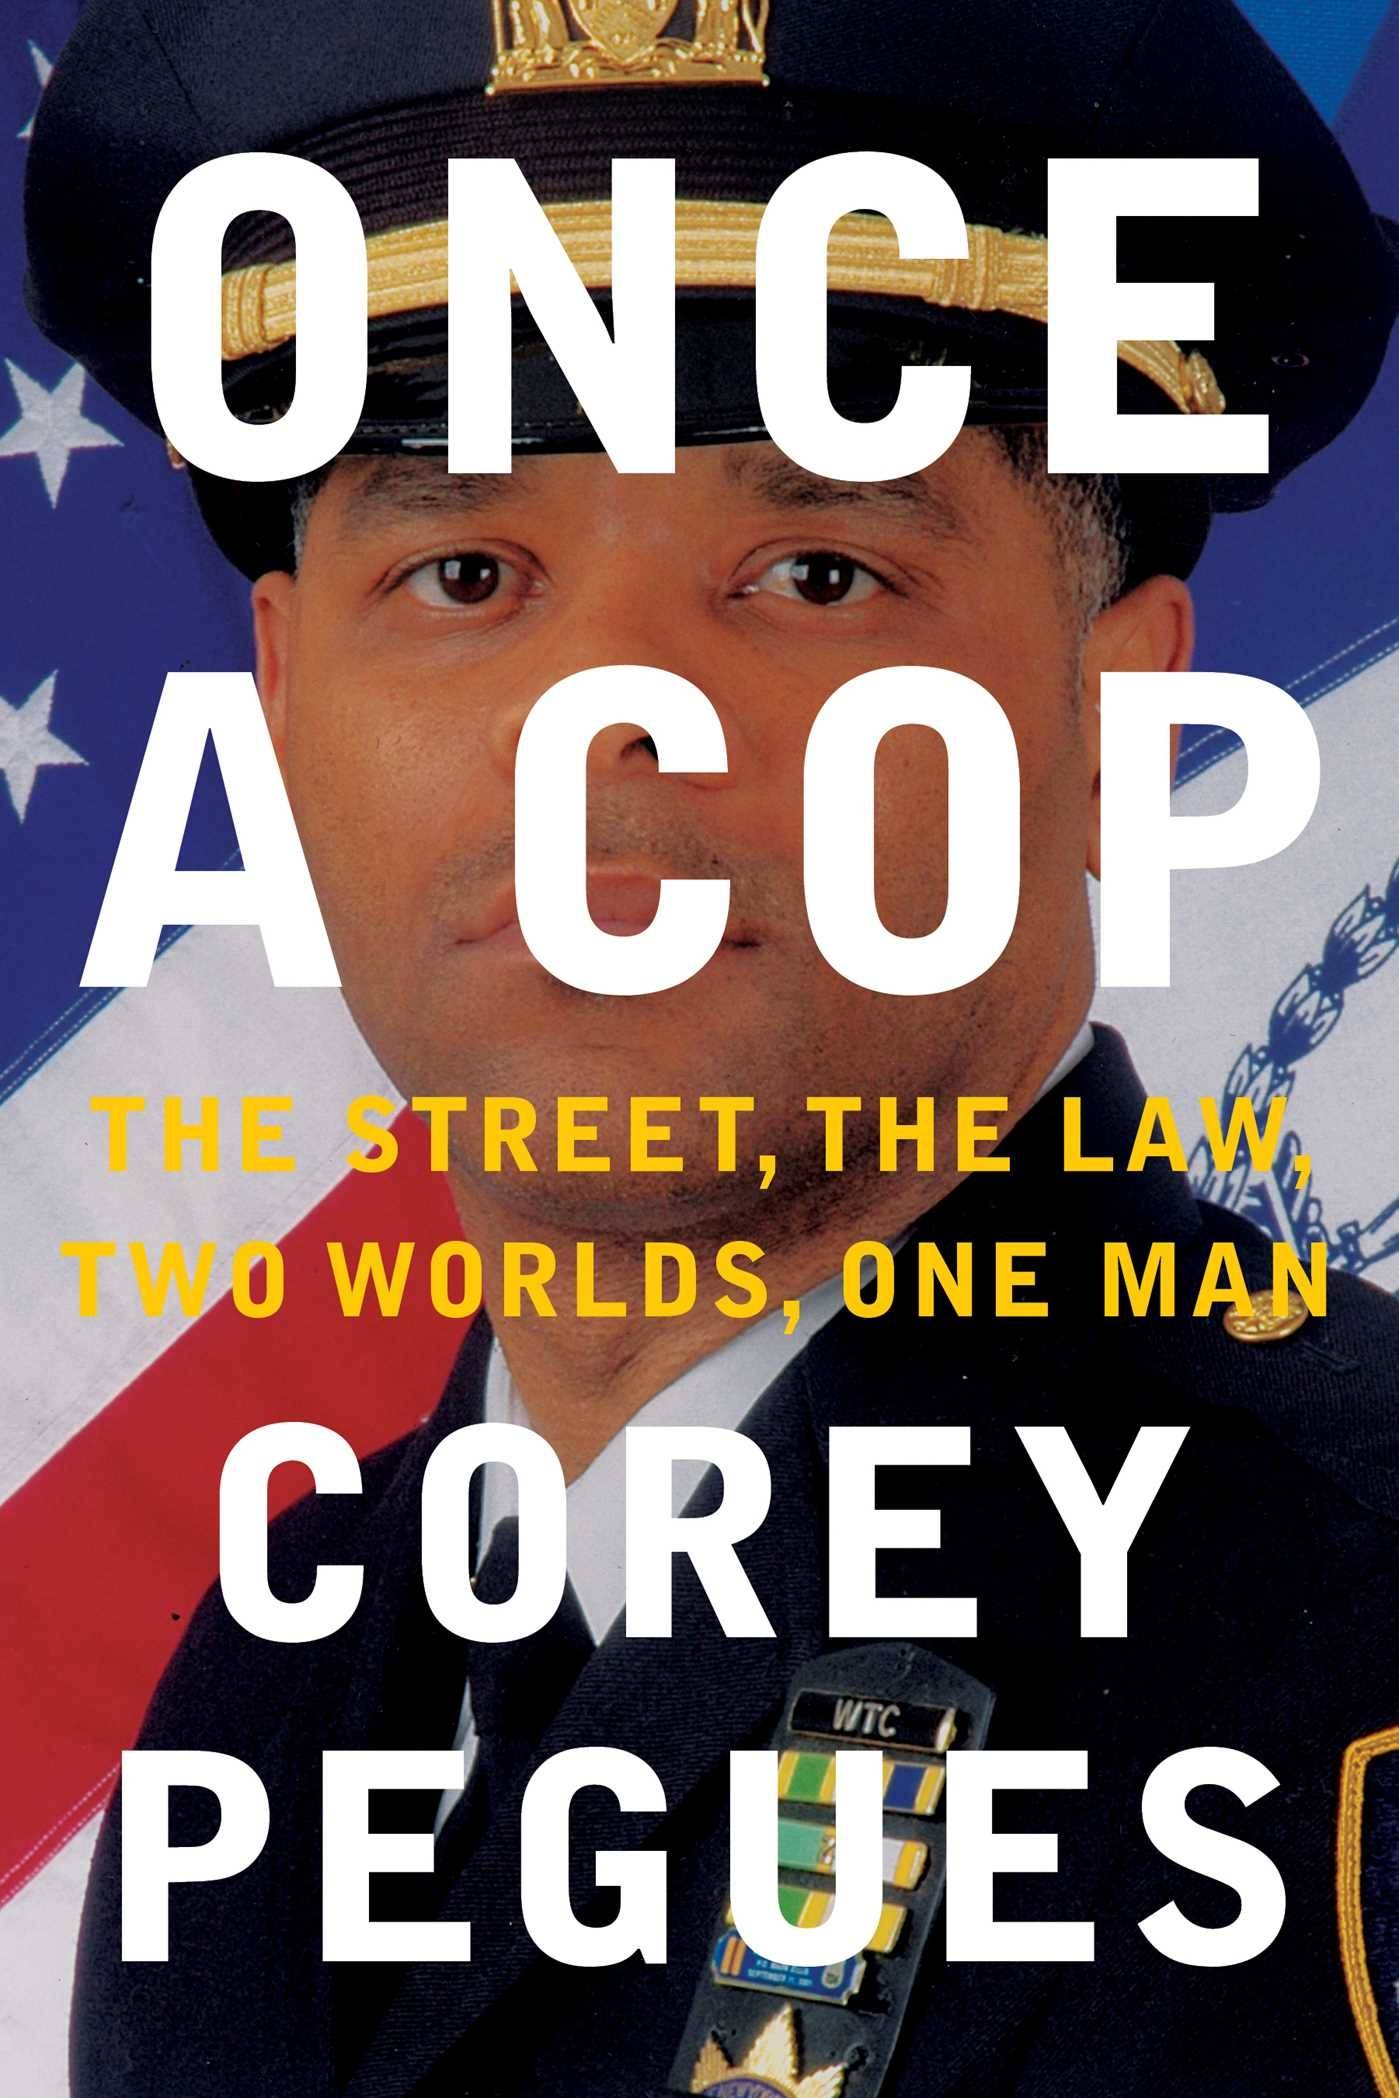 The Bookworm Sez: ‘Once a Cop’ walks both sides of the street